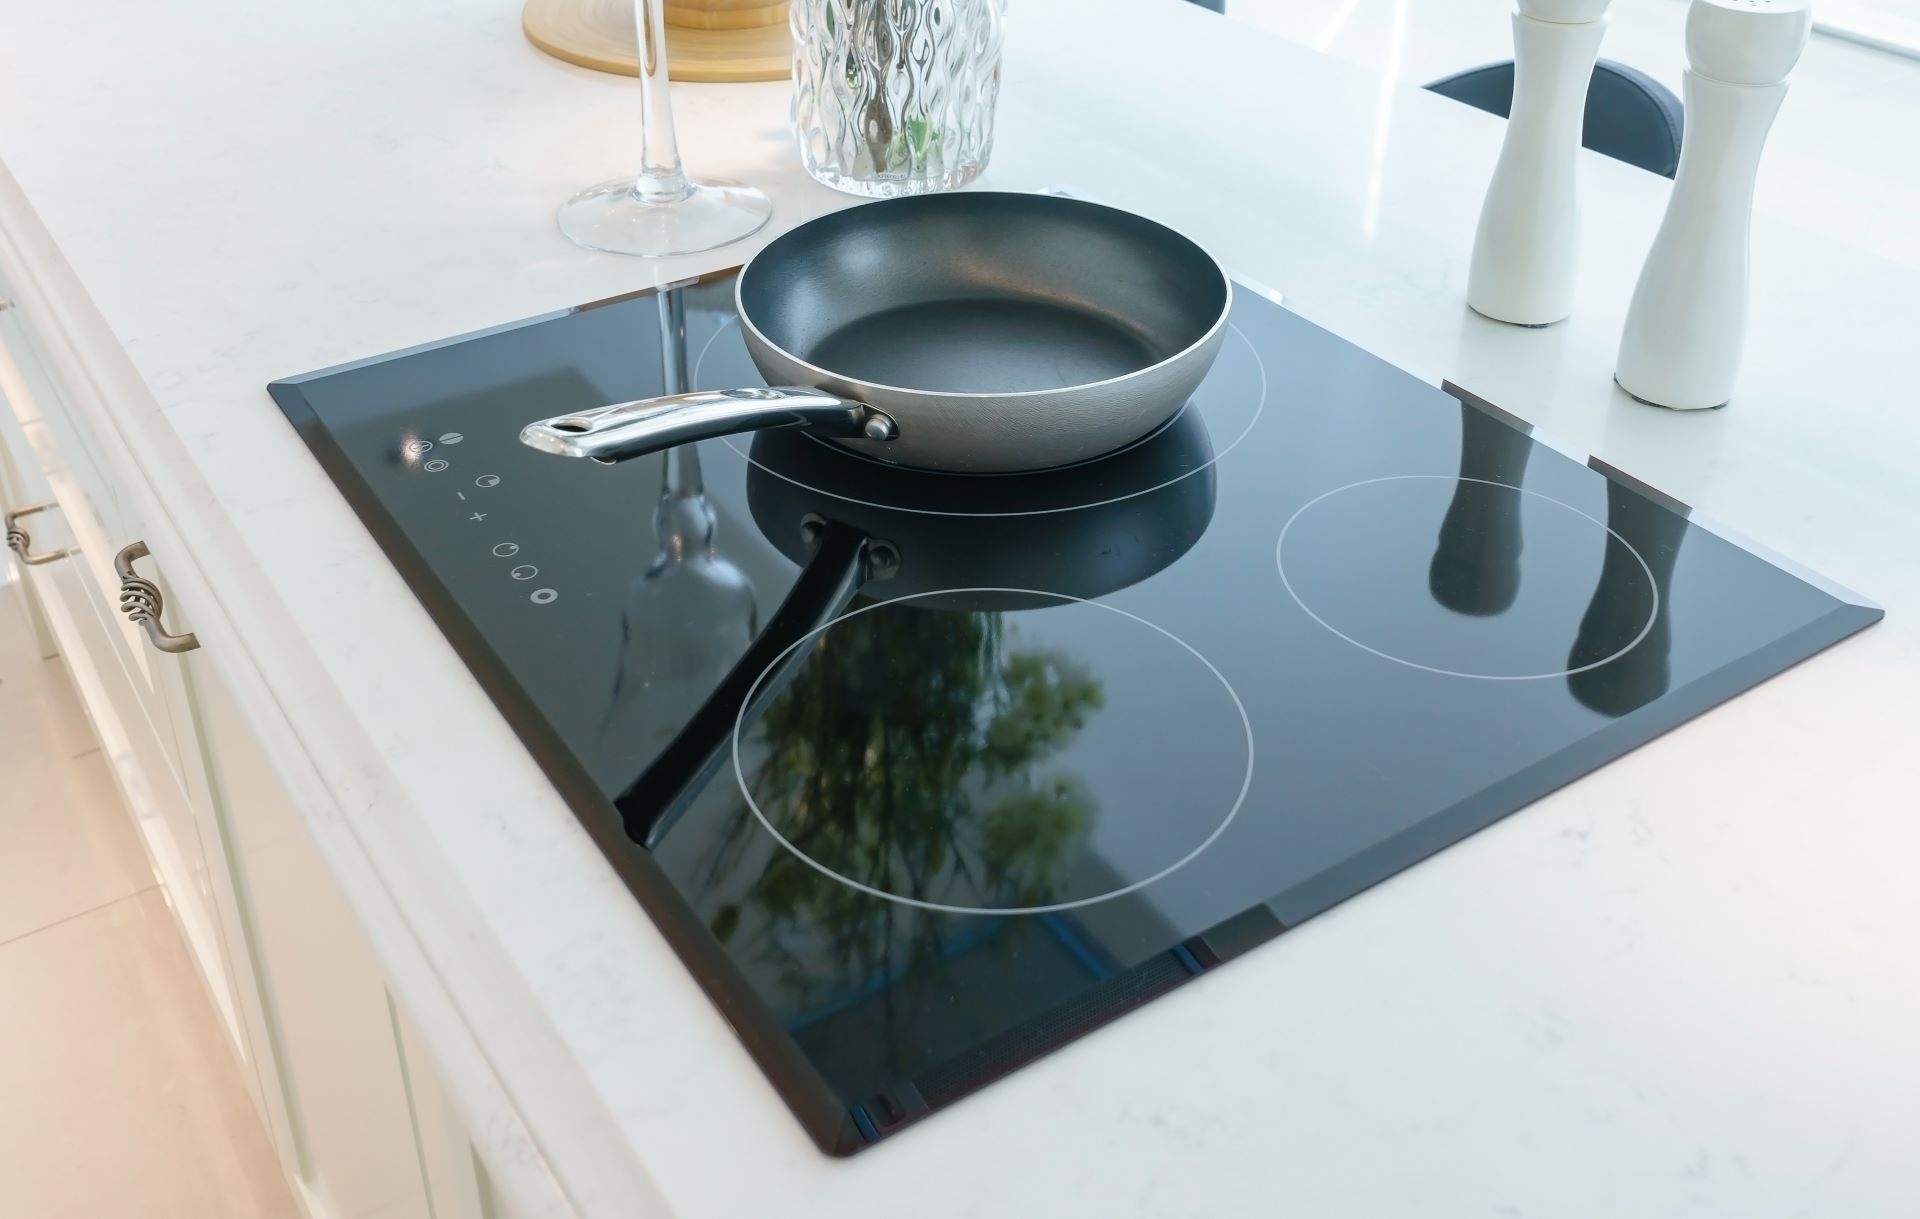 Why New Induction Cooktops Are Safer and Faster Than Gas or